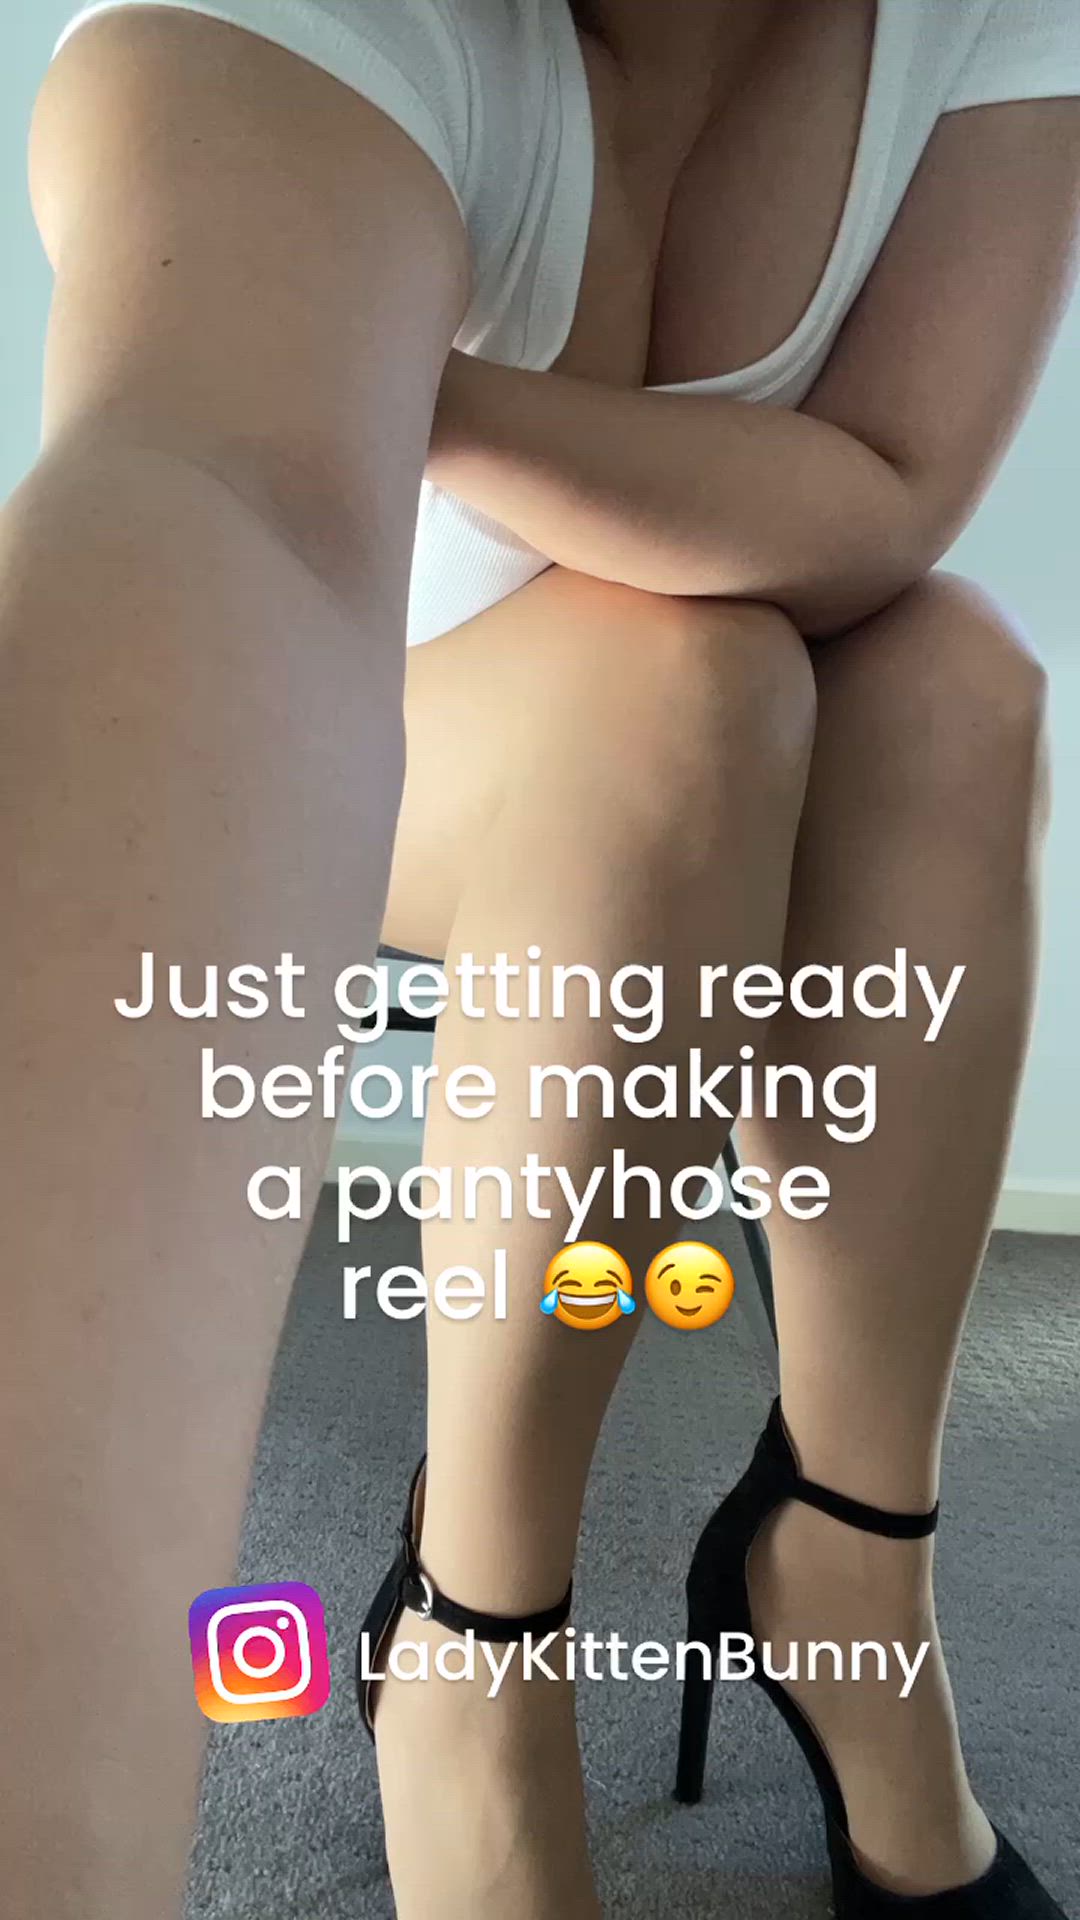 Big Tits porn video with onlyfans model ladykittenbunny <strong>@lady_kittenbunny</strong>